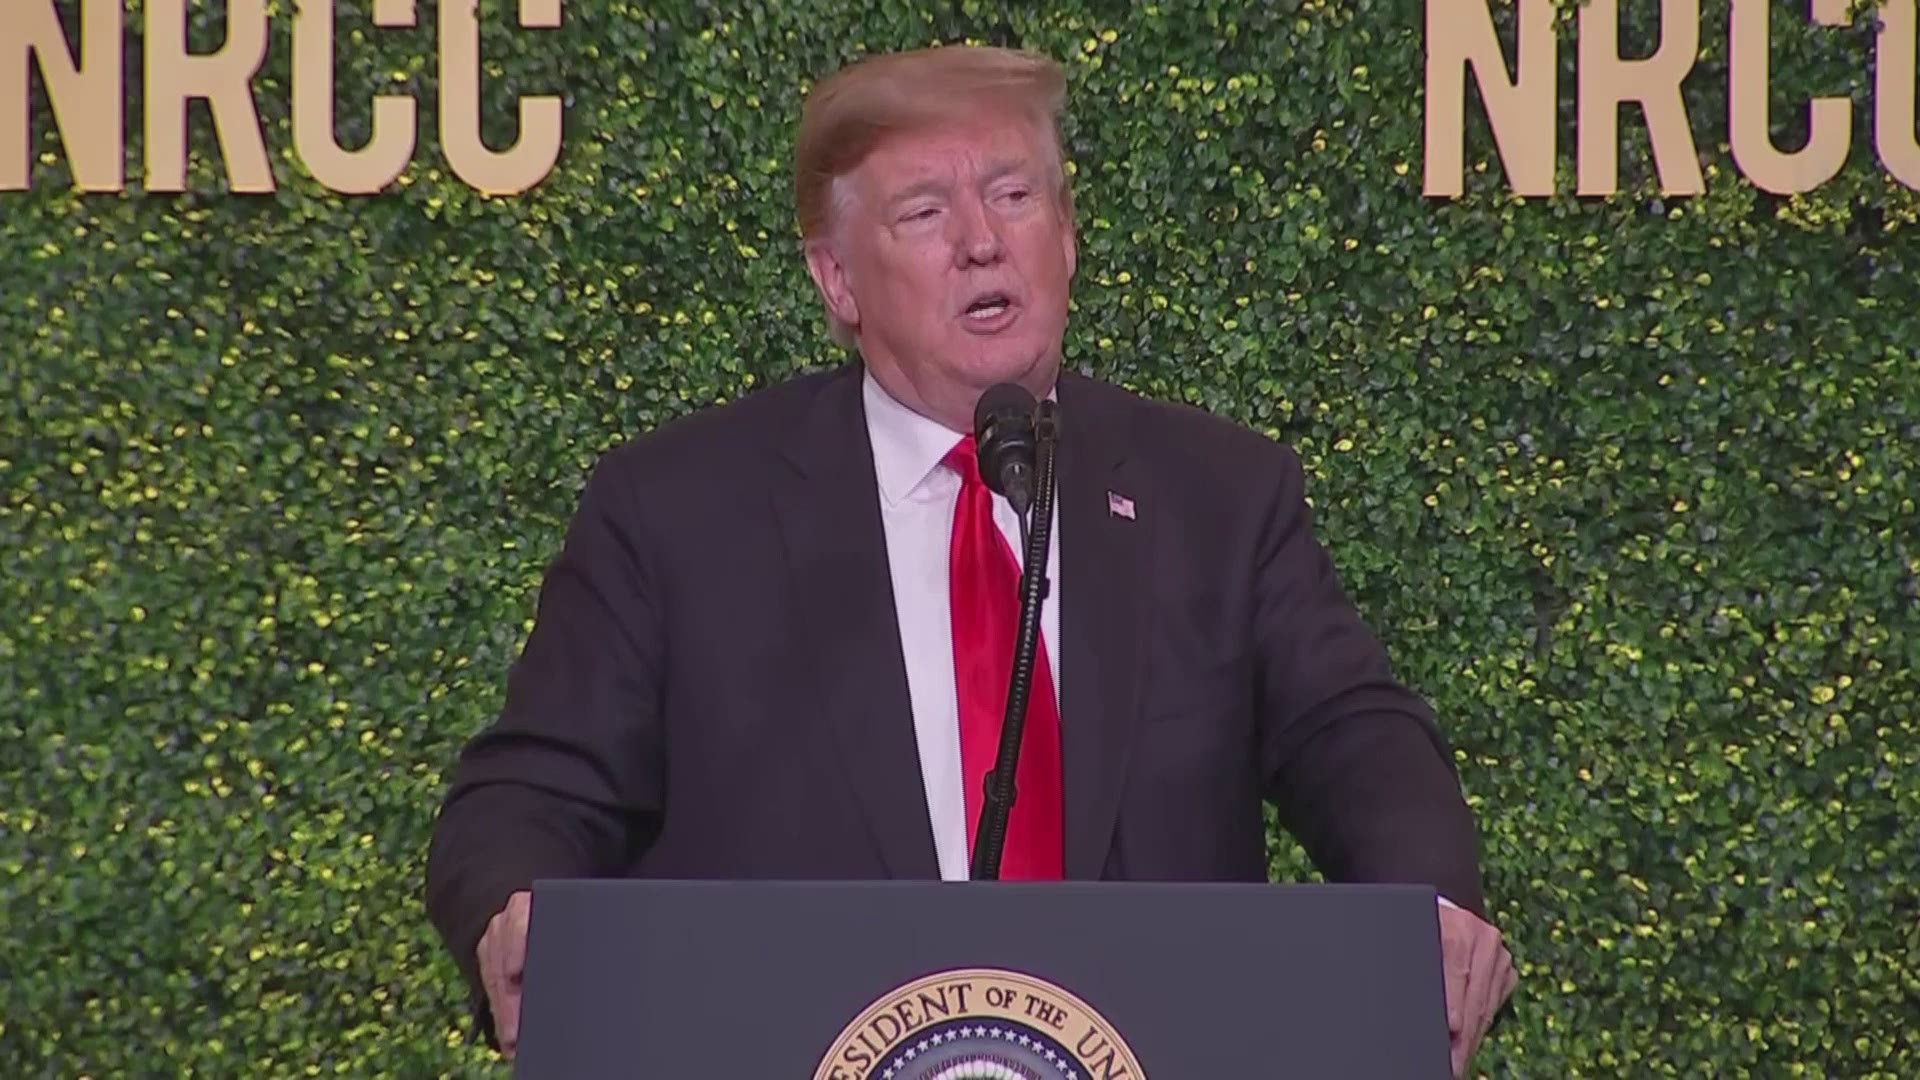 President Trump made remarks about windmills at the National Republican Congressional Committee's dinner on Tuesday: "If you have a windmill anywhere near your house, congratulations your house just went down 75 percent in value. You know they say the noise causes cancer."